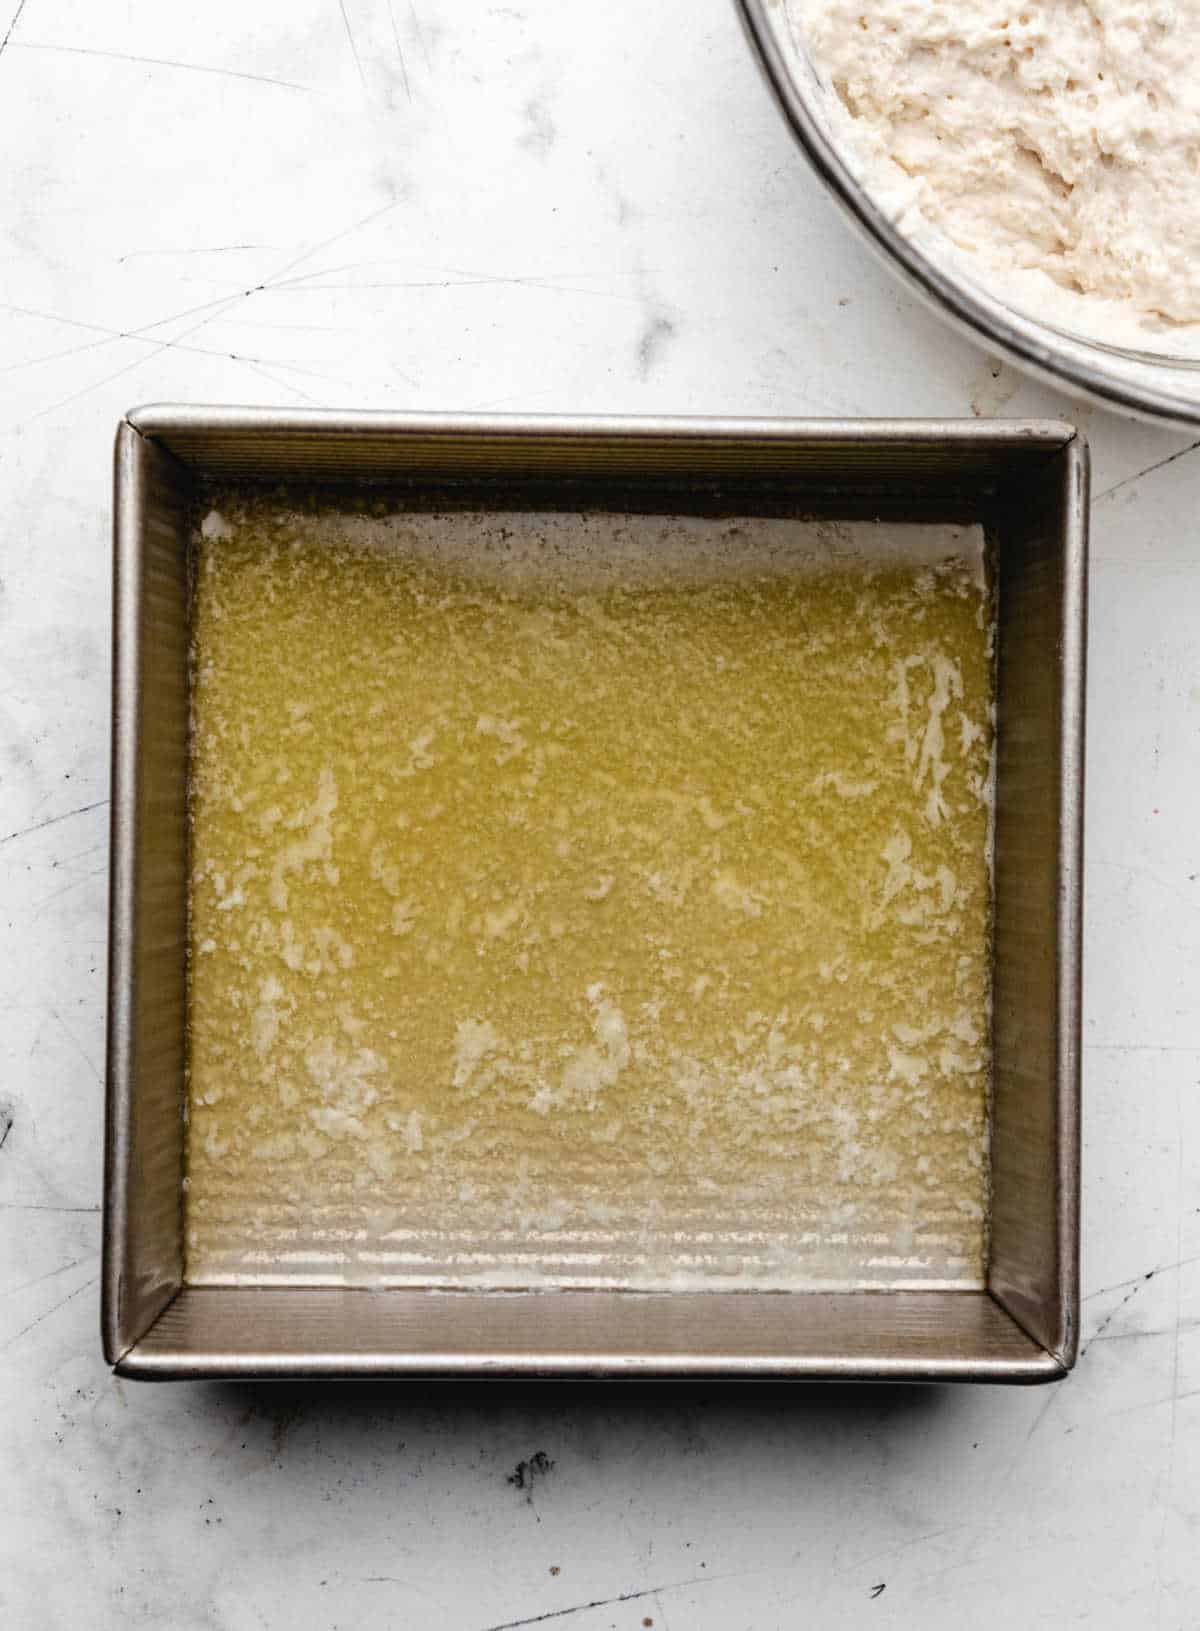 Melted butter in an 8 by 8 pan.